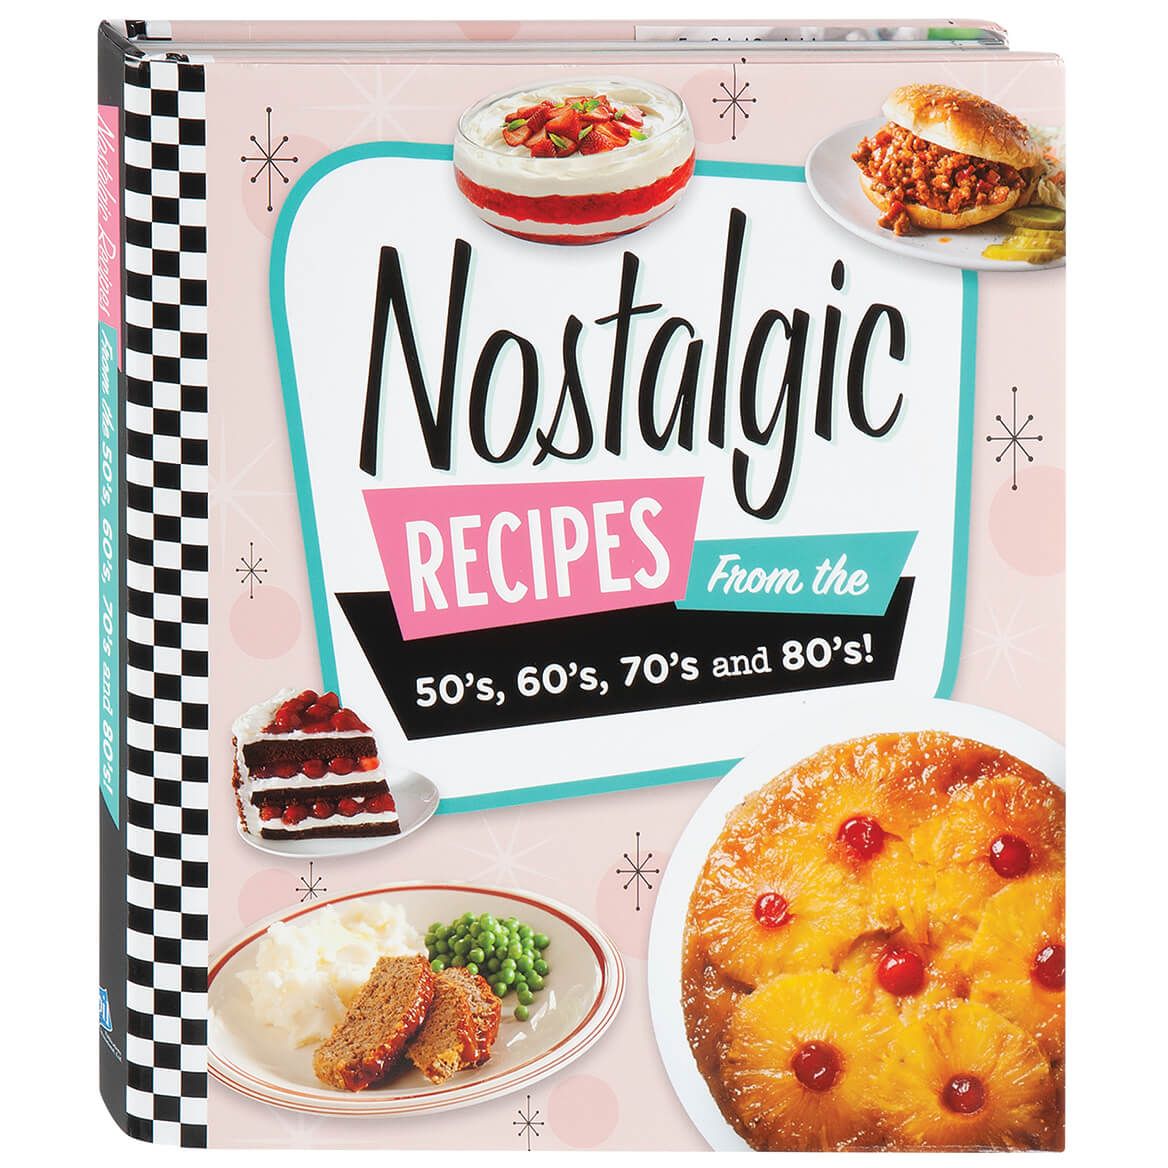 Nostalgic Recipes from the '50s, '60s, '70s and '80s! + '-' + 377094